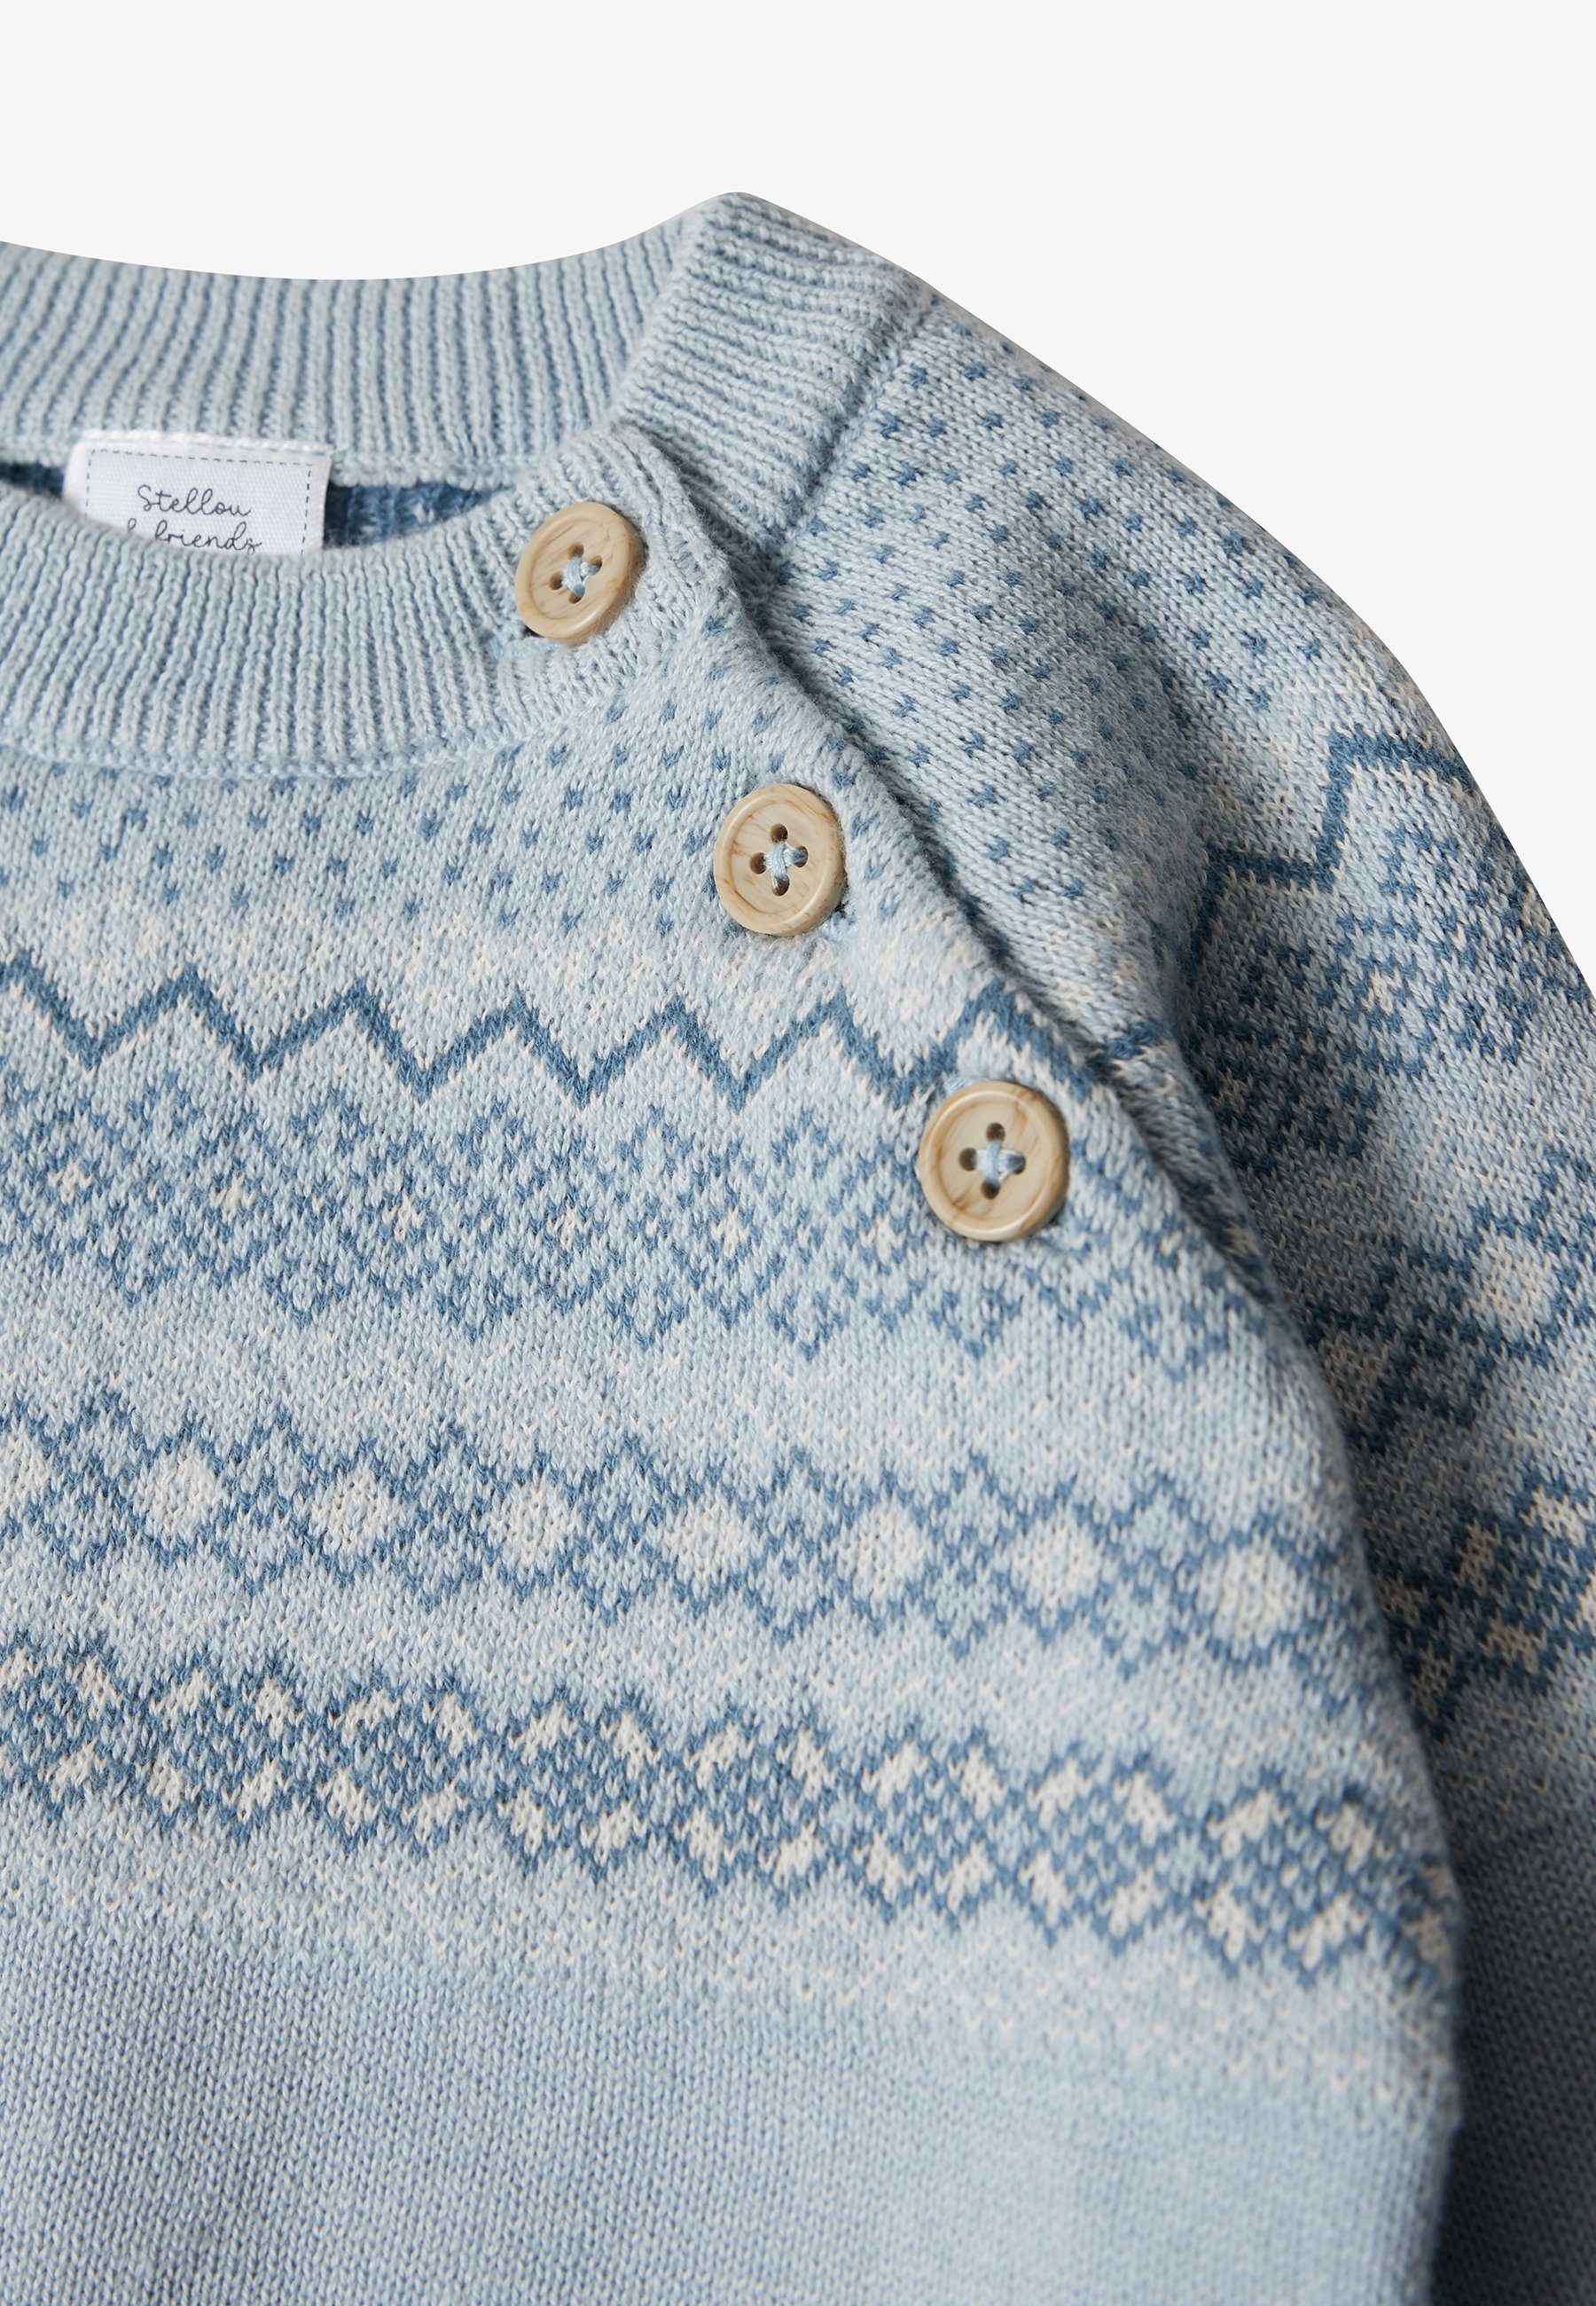 & friends and Norweger-Pullover Stellou hellblau Norwegerpullover friends Stellou